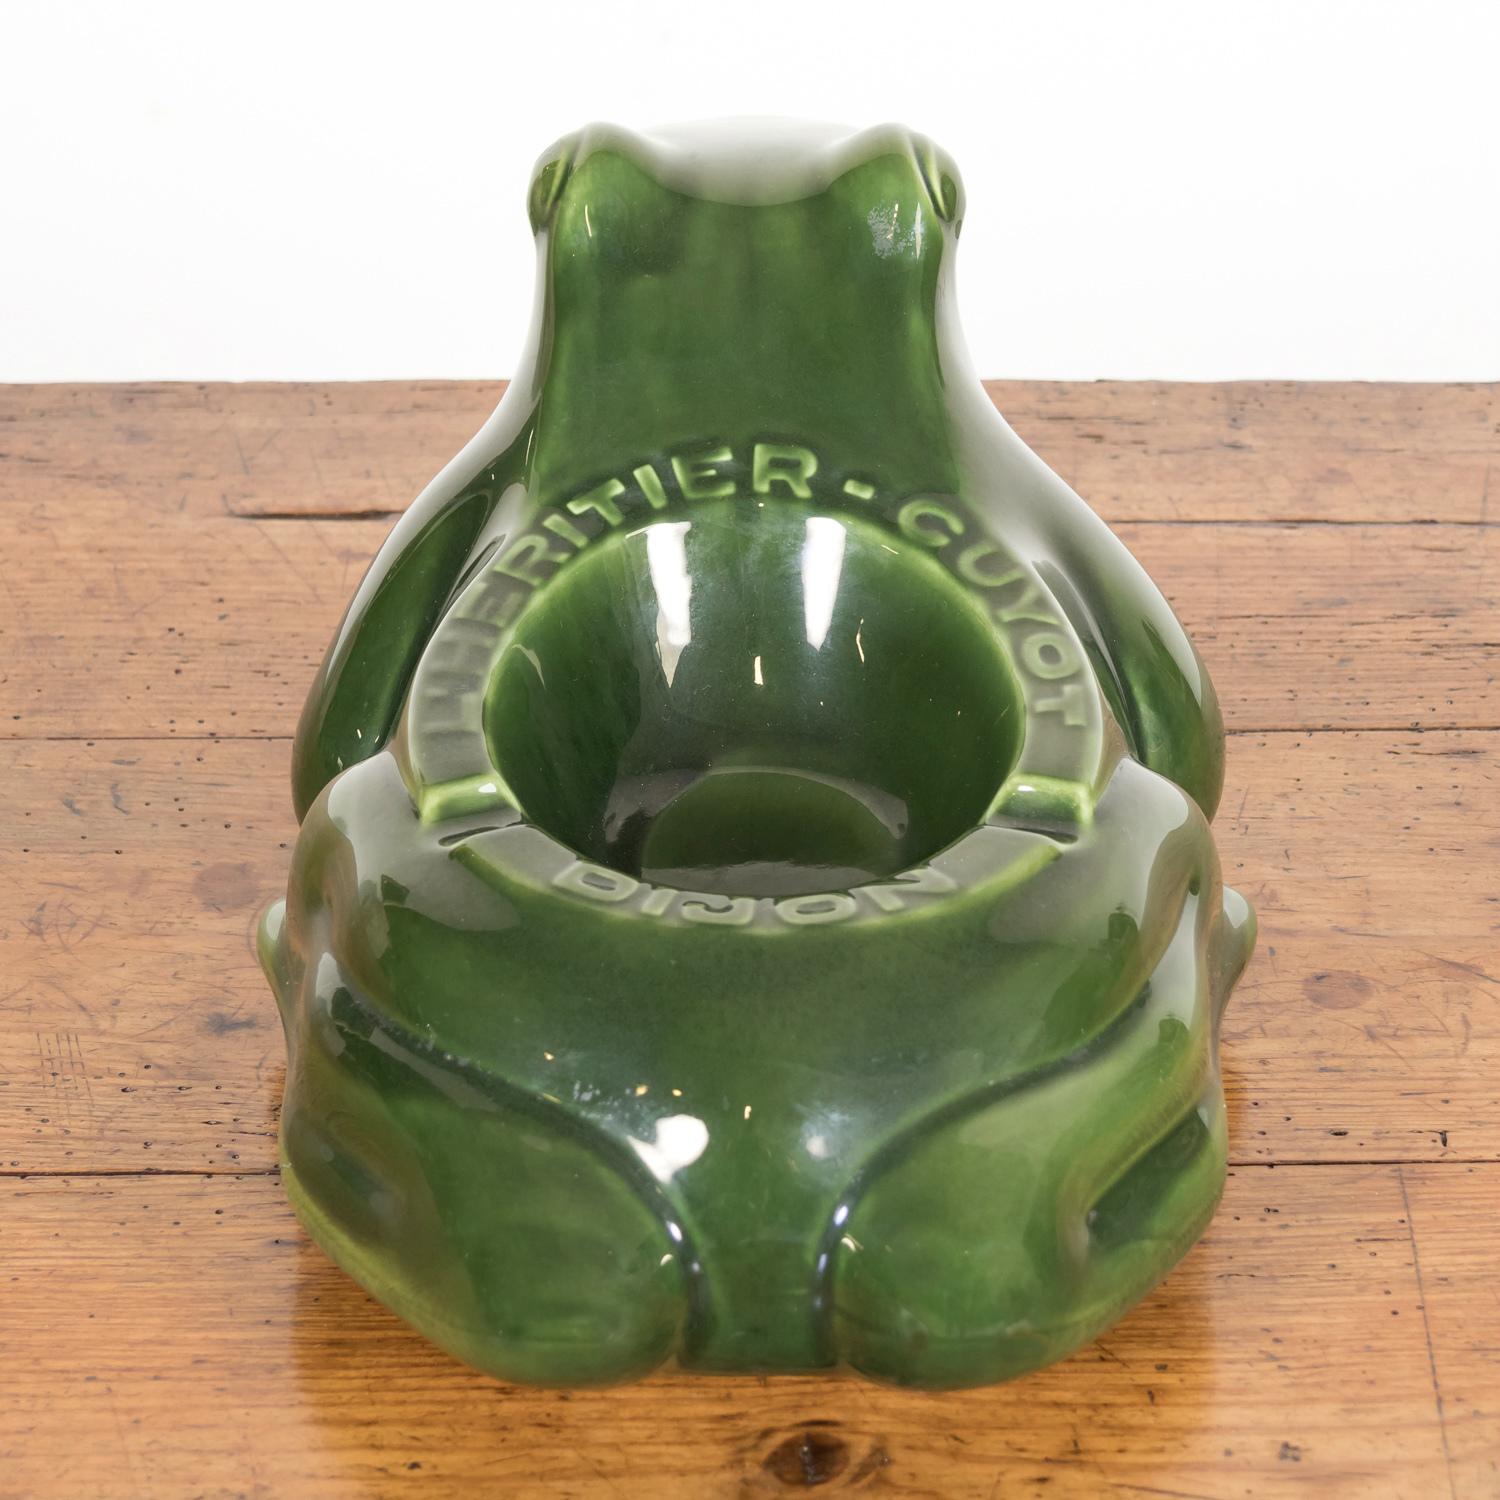 Large Vintage French L'HERITIER GUYOT DIJON Green Ceramic Frog Ad Ashtray 4